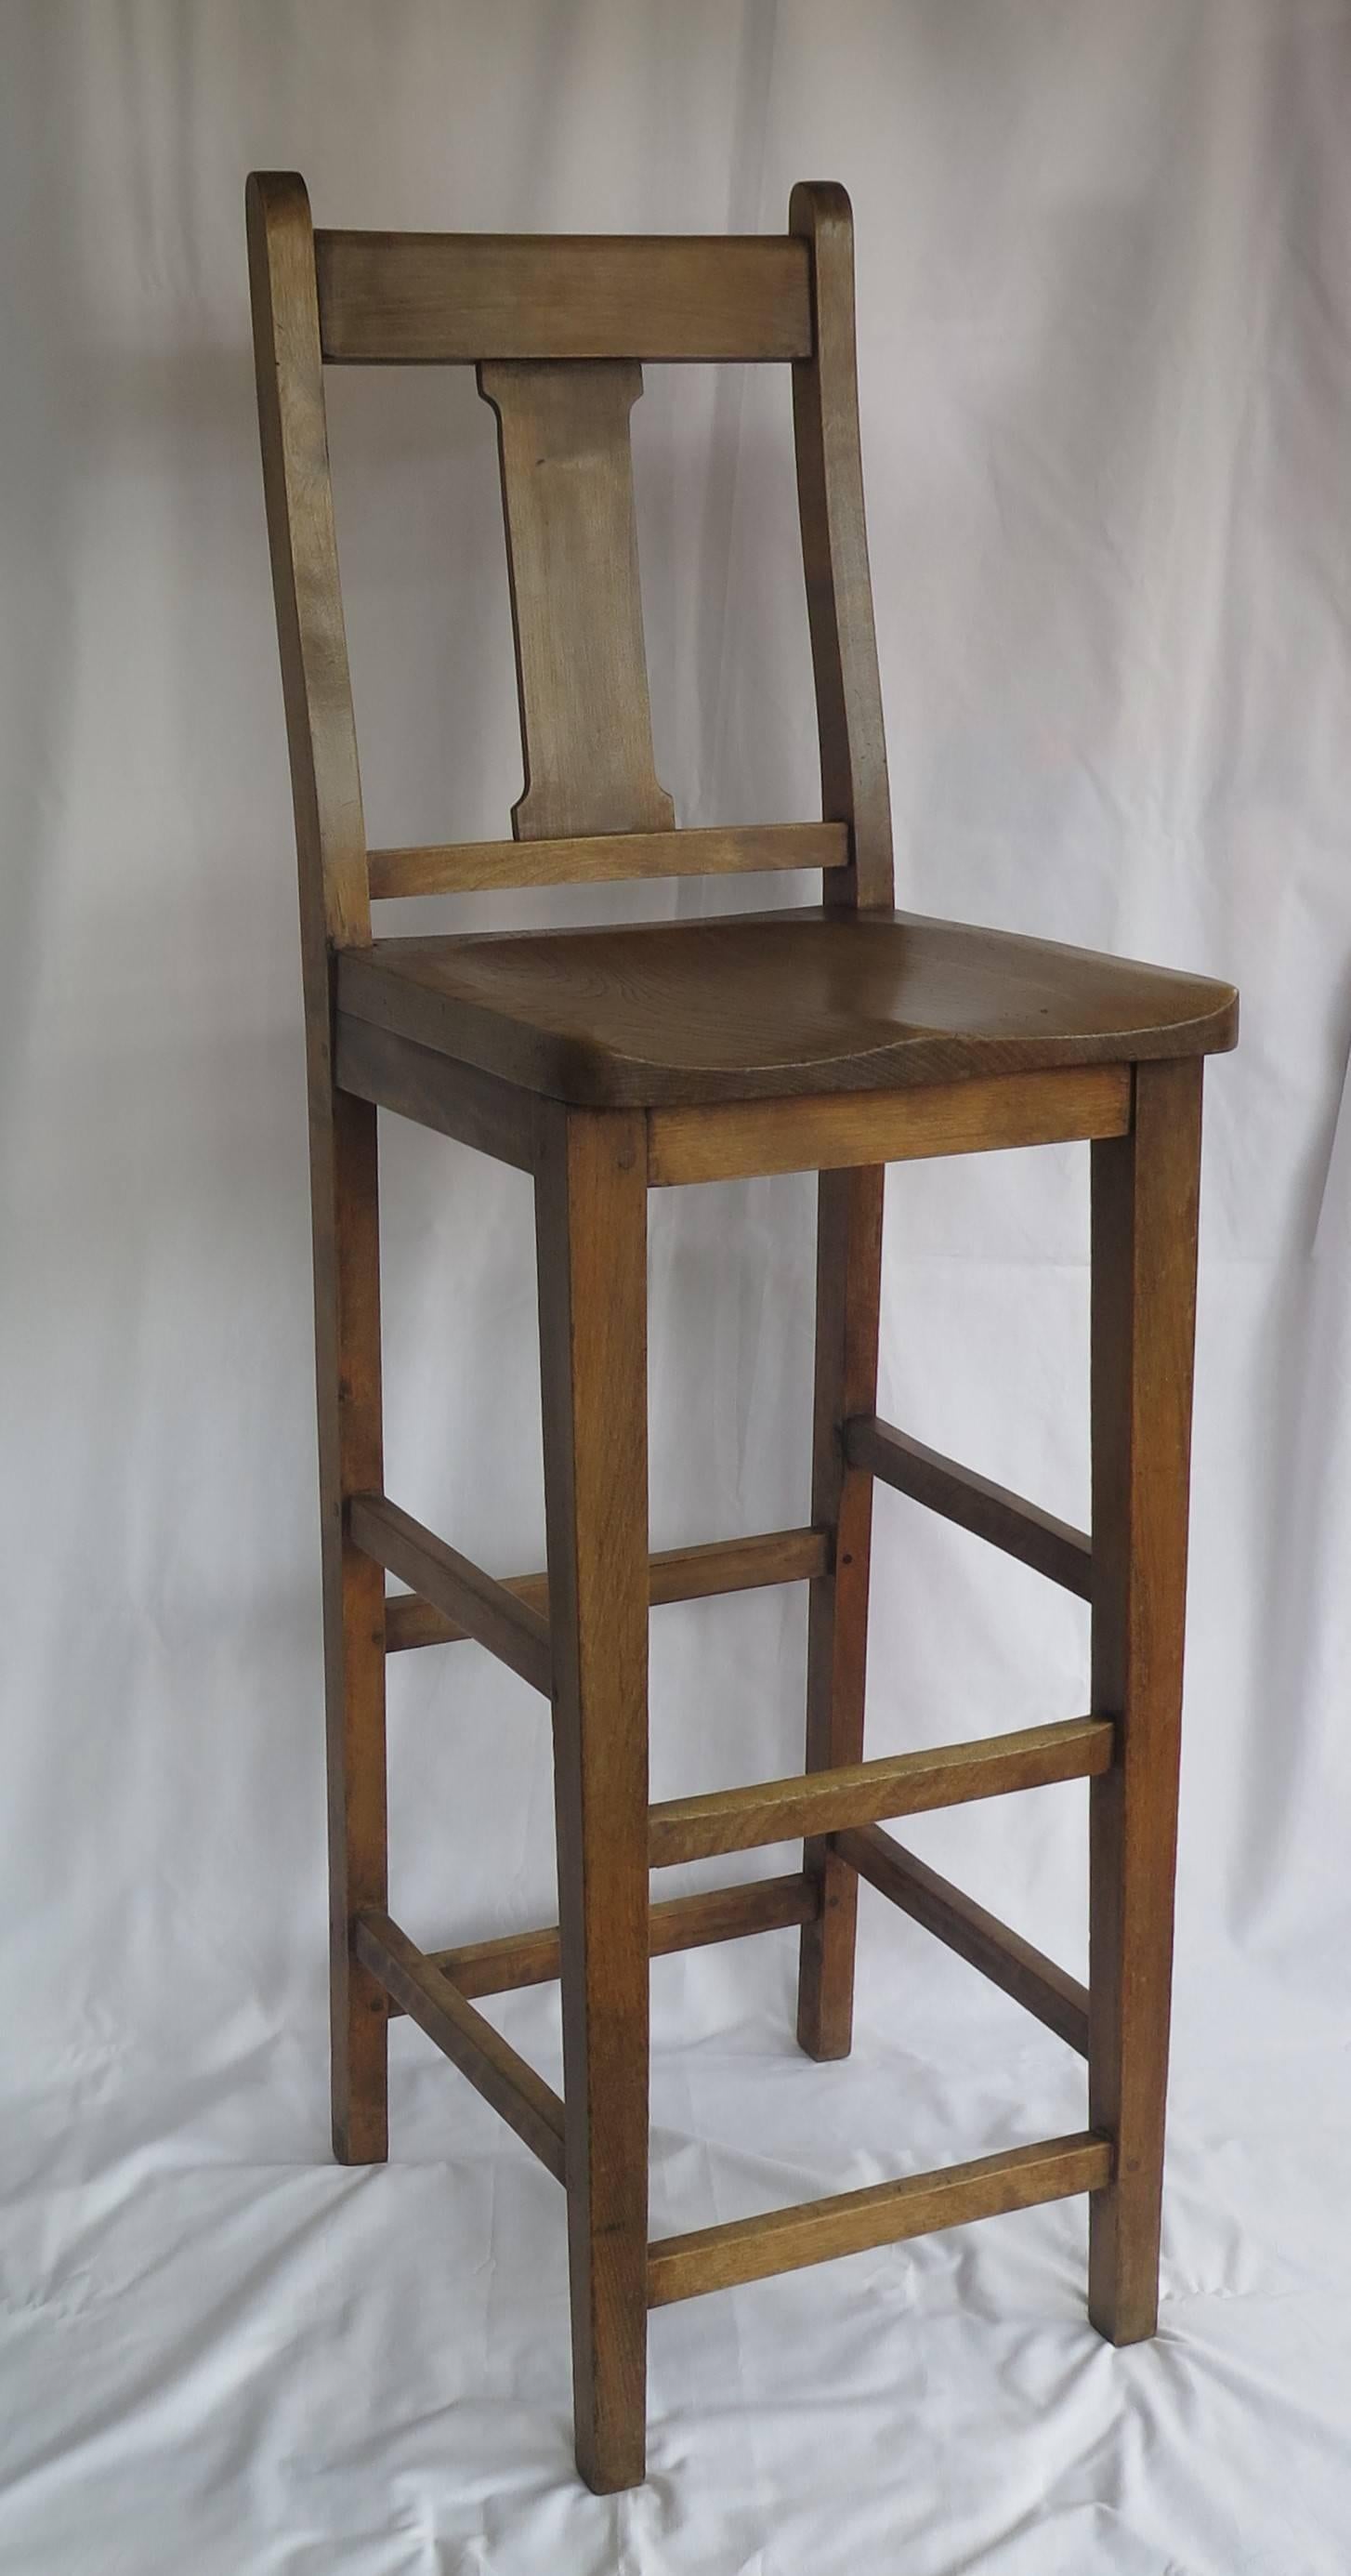 This is a late 19th century Clerk's Estate High Chair as used at a Clerk's Desk in the late Victorian period, circa 1880, now very useful as a kitchen chair at a breakfast bar.

The chair is made of beech with a shaped elm seat and a nicely curved